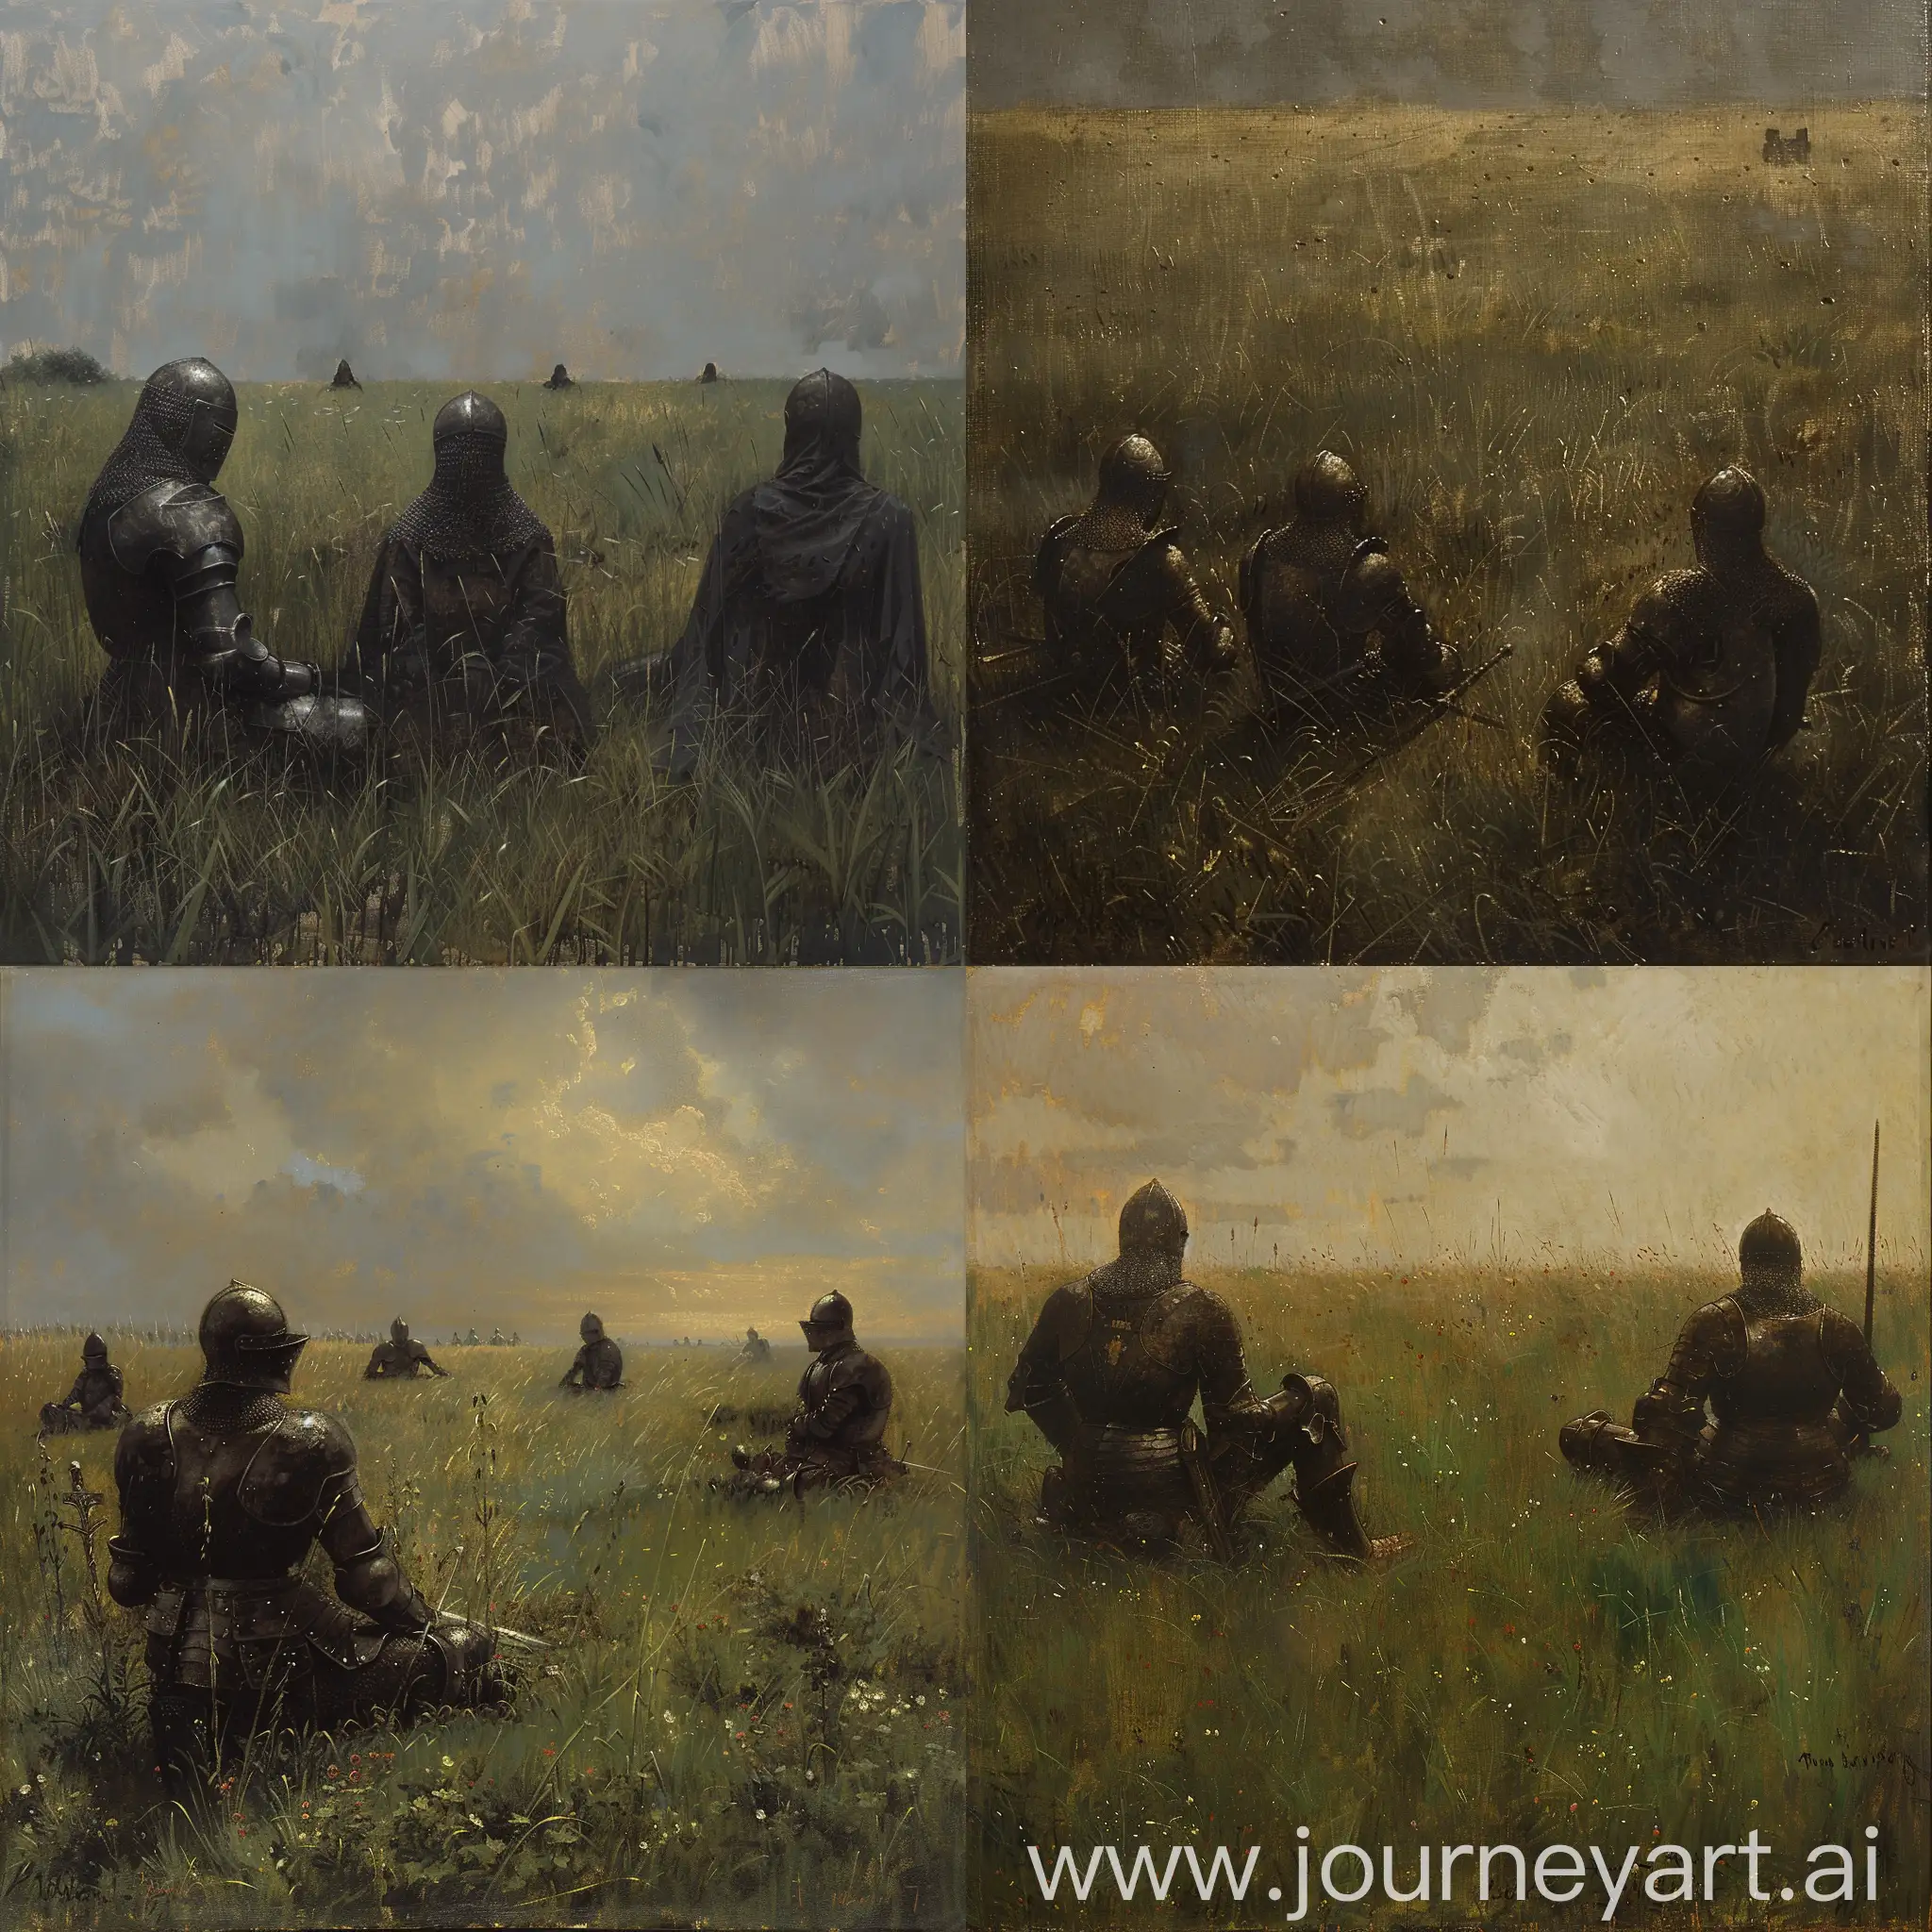 vast grass field with knights with a dark only armour sitting happily, knights barely visible, old painting